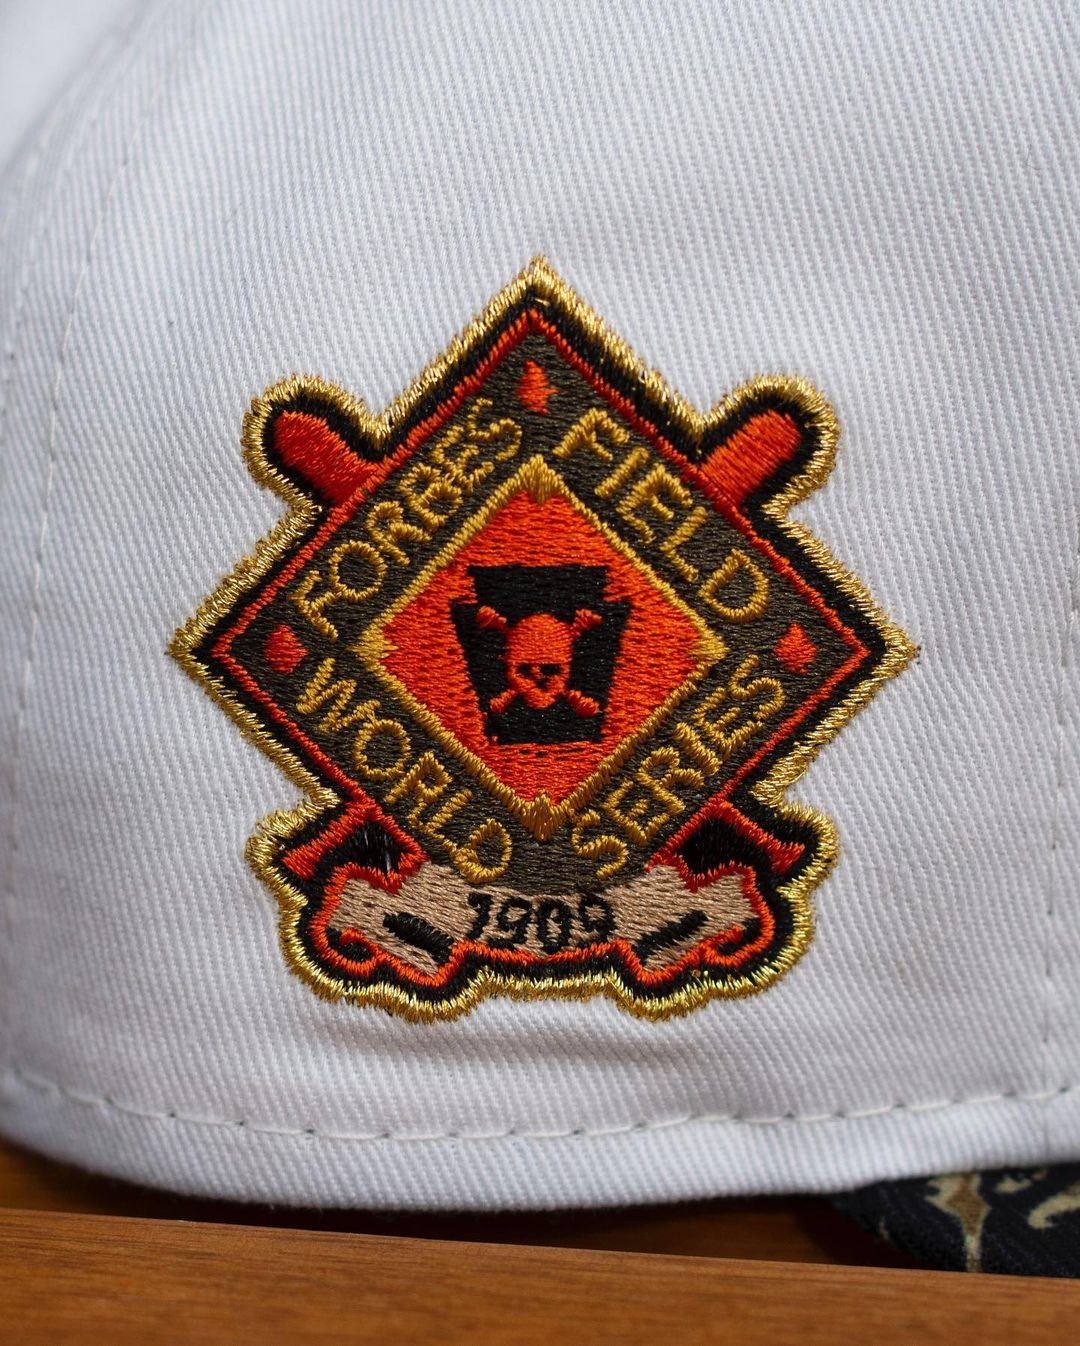 MLB Cooperstown Detroit Tigers